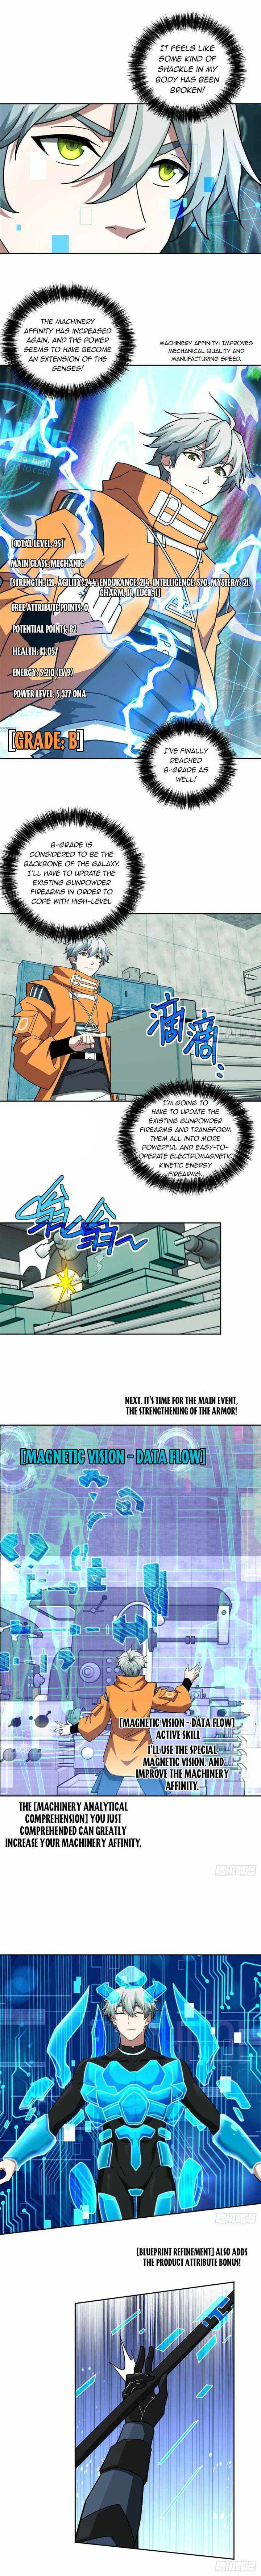 The Legendary Mechanic Chapter 222 Page 4